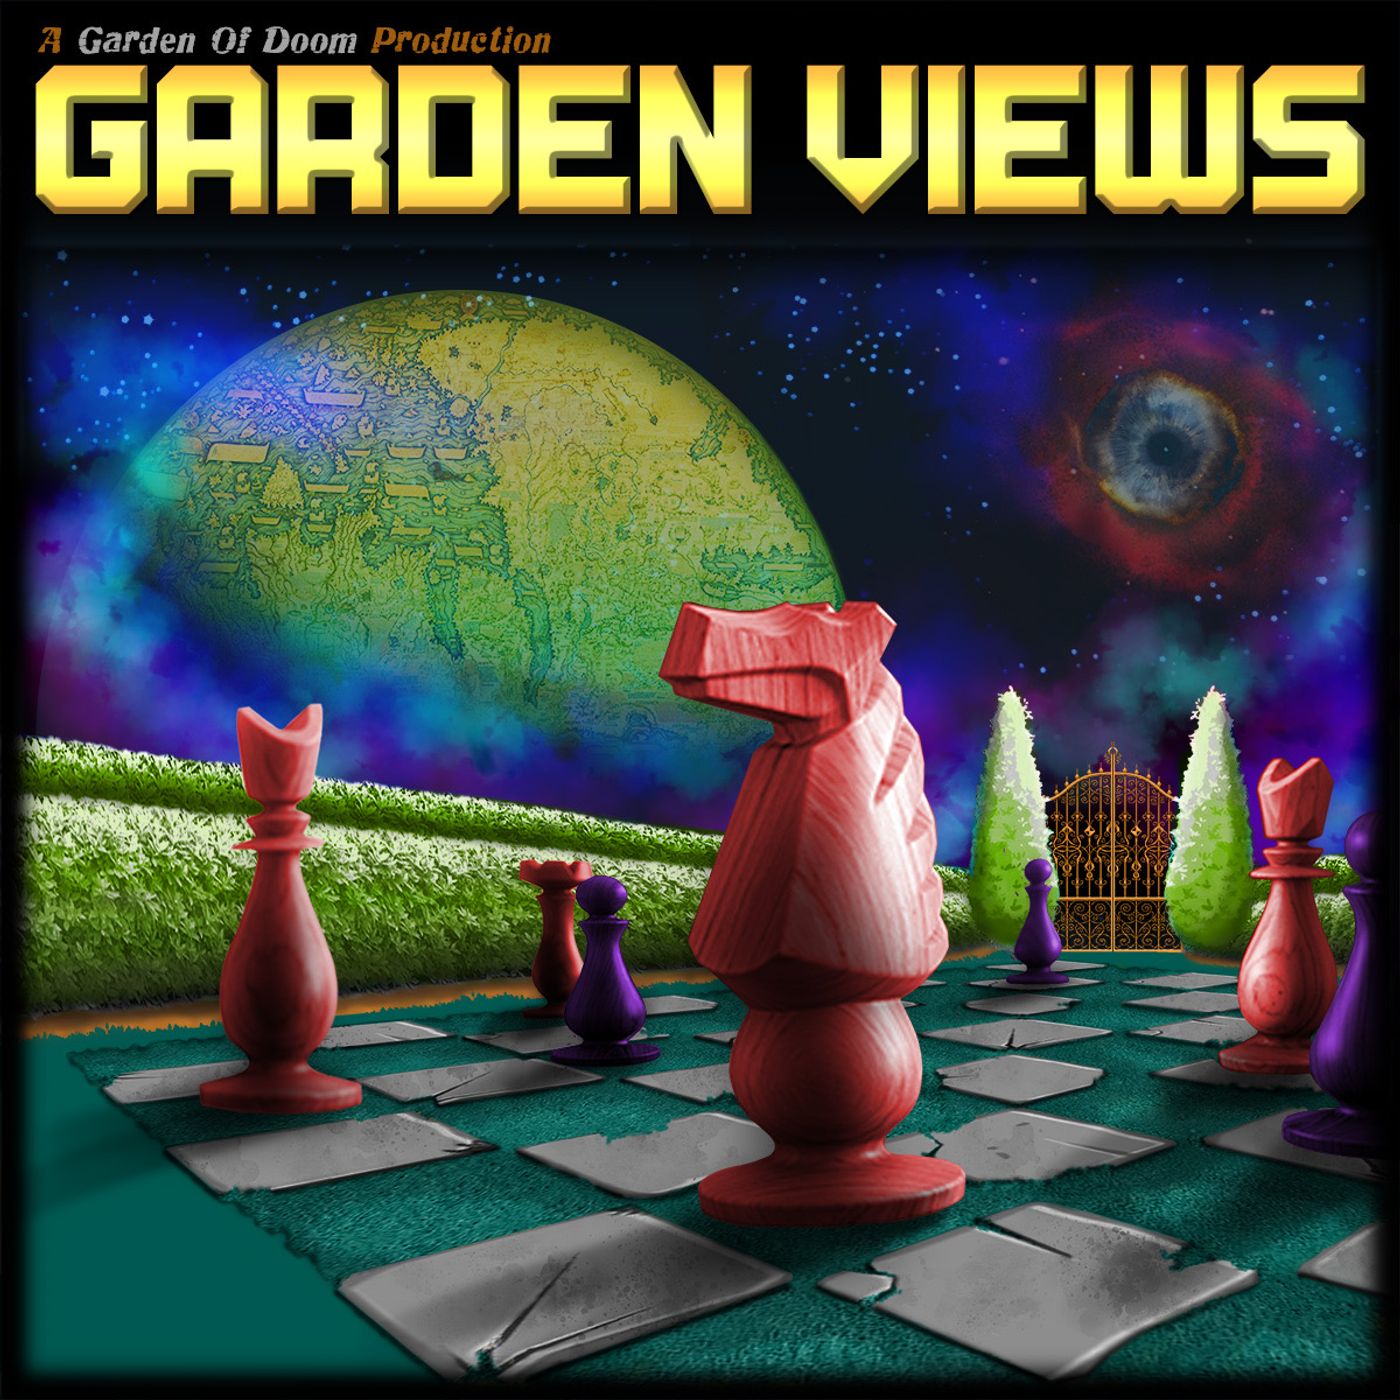 Garden Views 35 Space Law is the Final Frontier